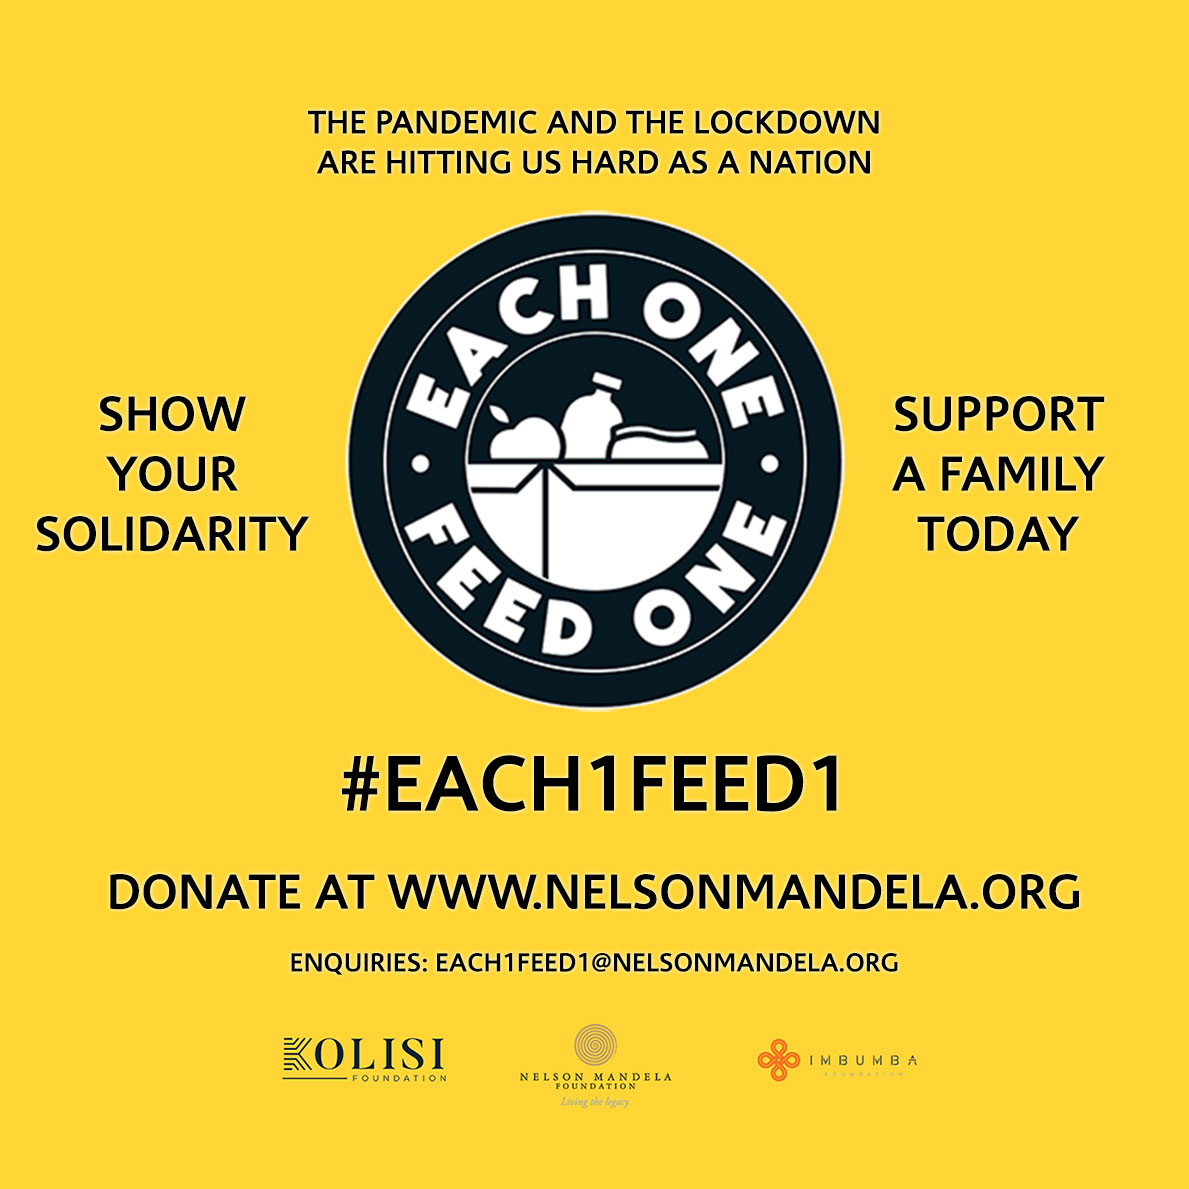 Together with our partners, Kolisi Foundation & Imbumba Foundation, #Each1Feed1 recognizes the daily need to secure food during this time. Let us act against hunger today. Let us show human solidarity by supporting a family during this time of global pandemic.